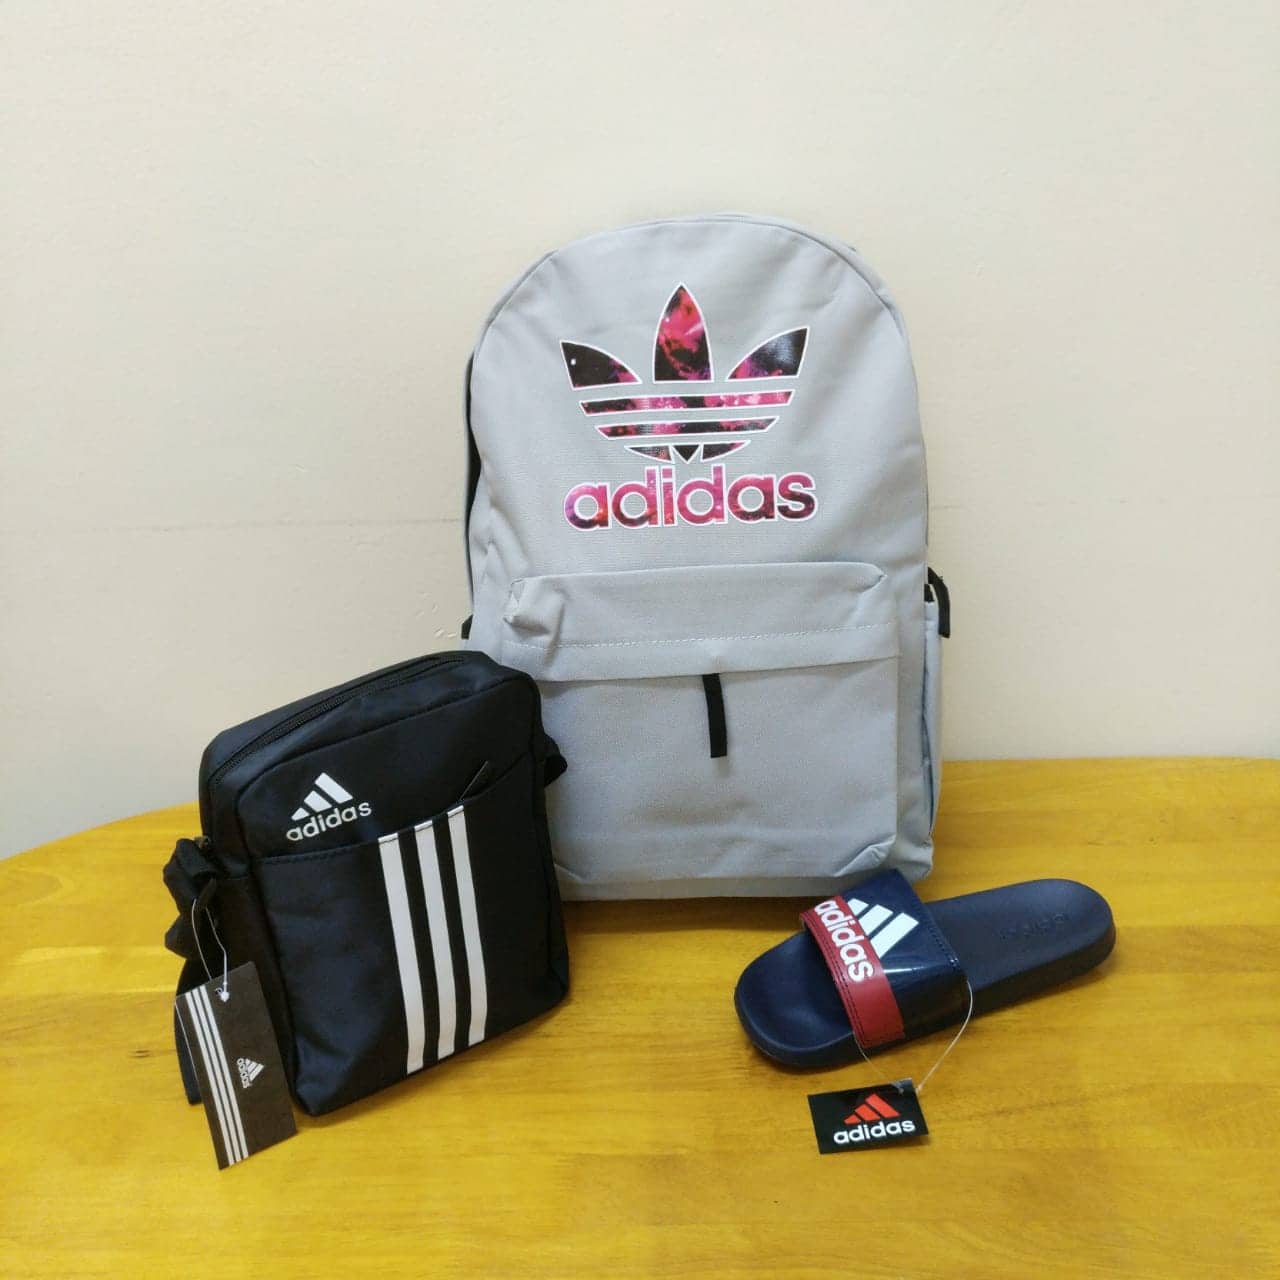 adidas combo offer